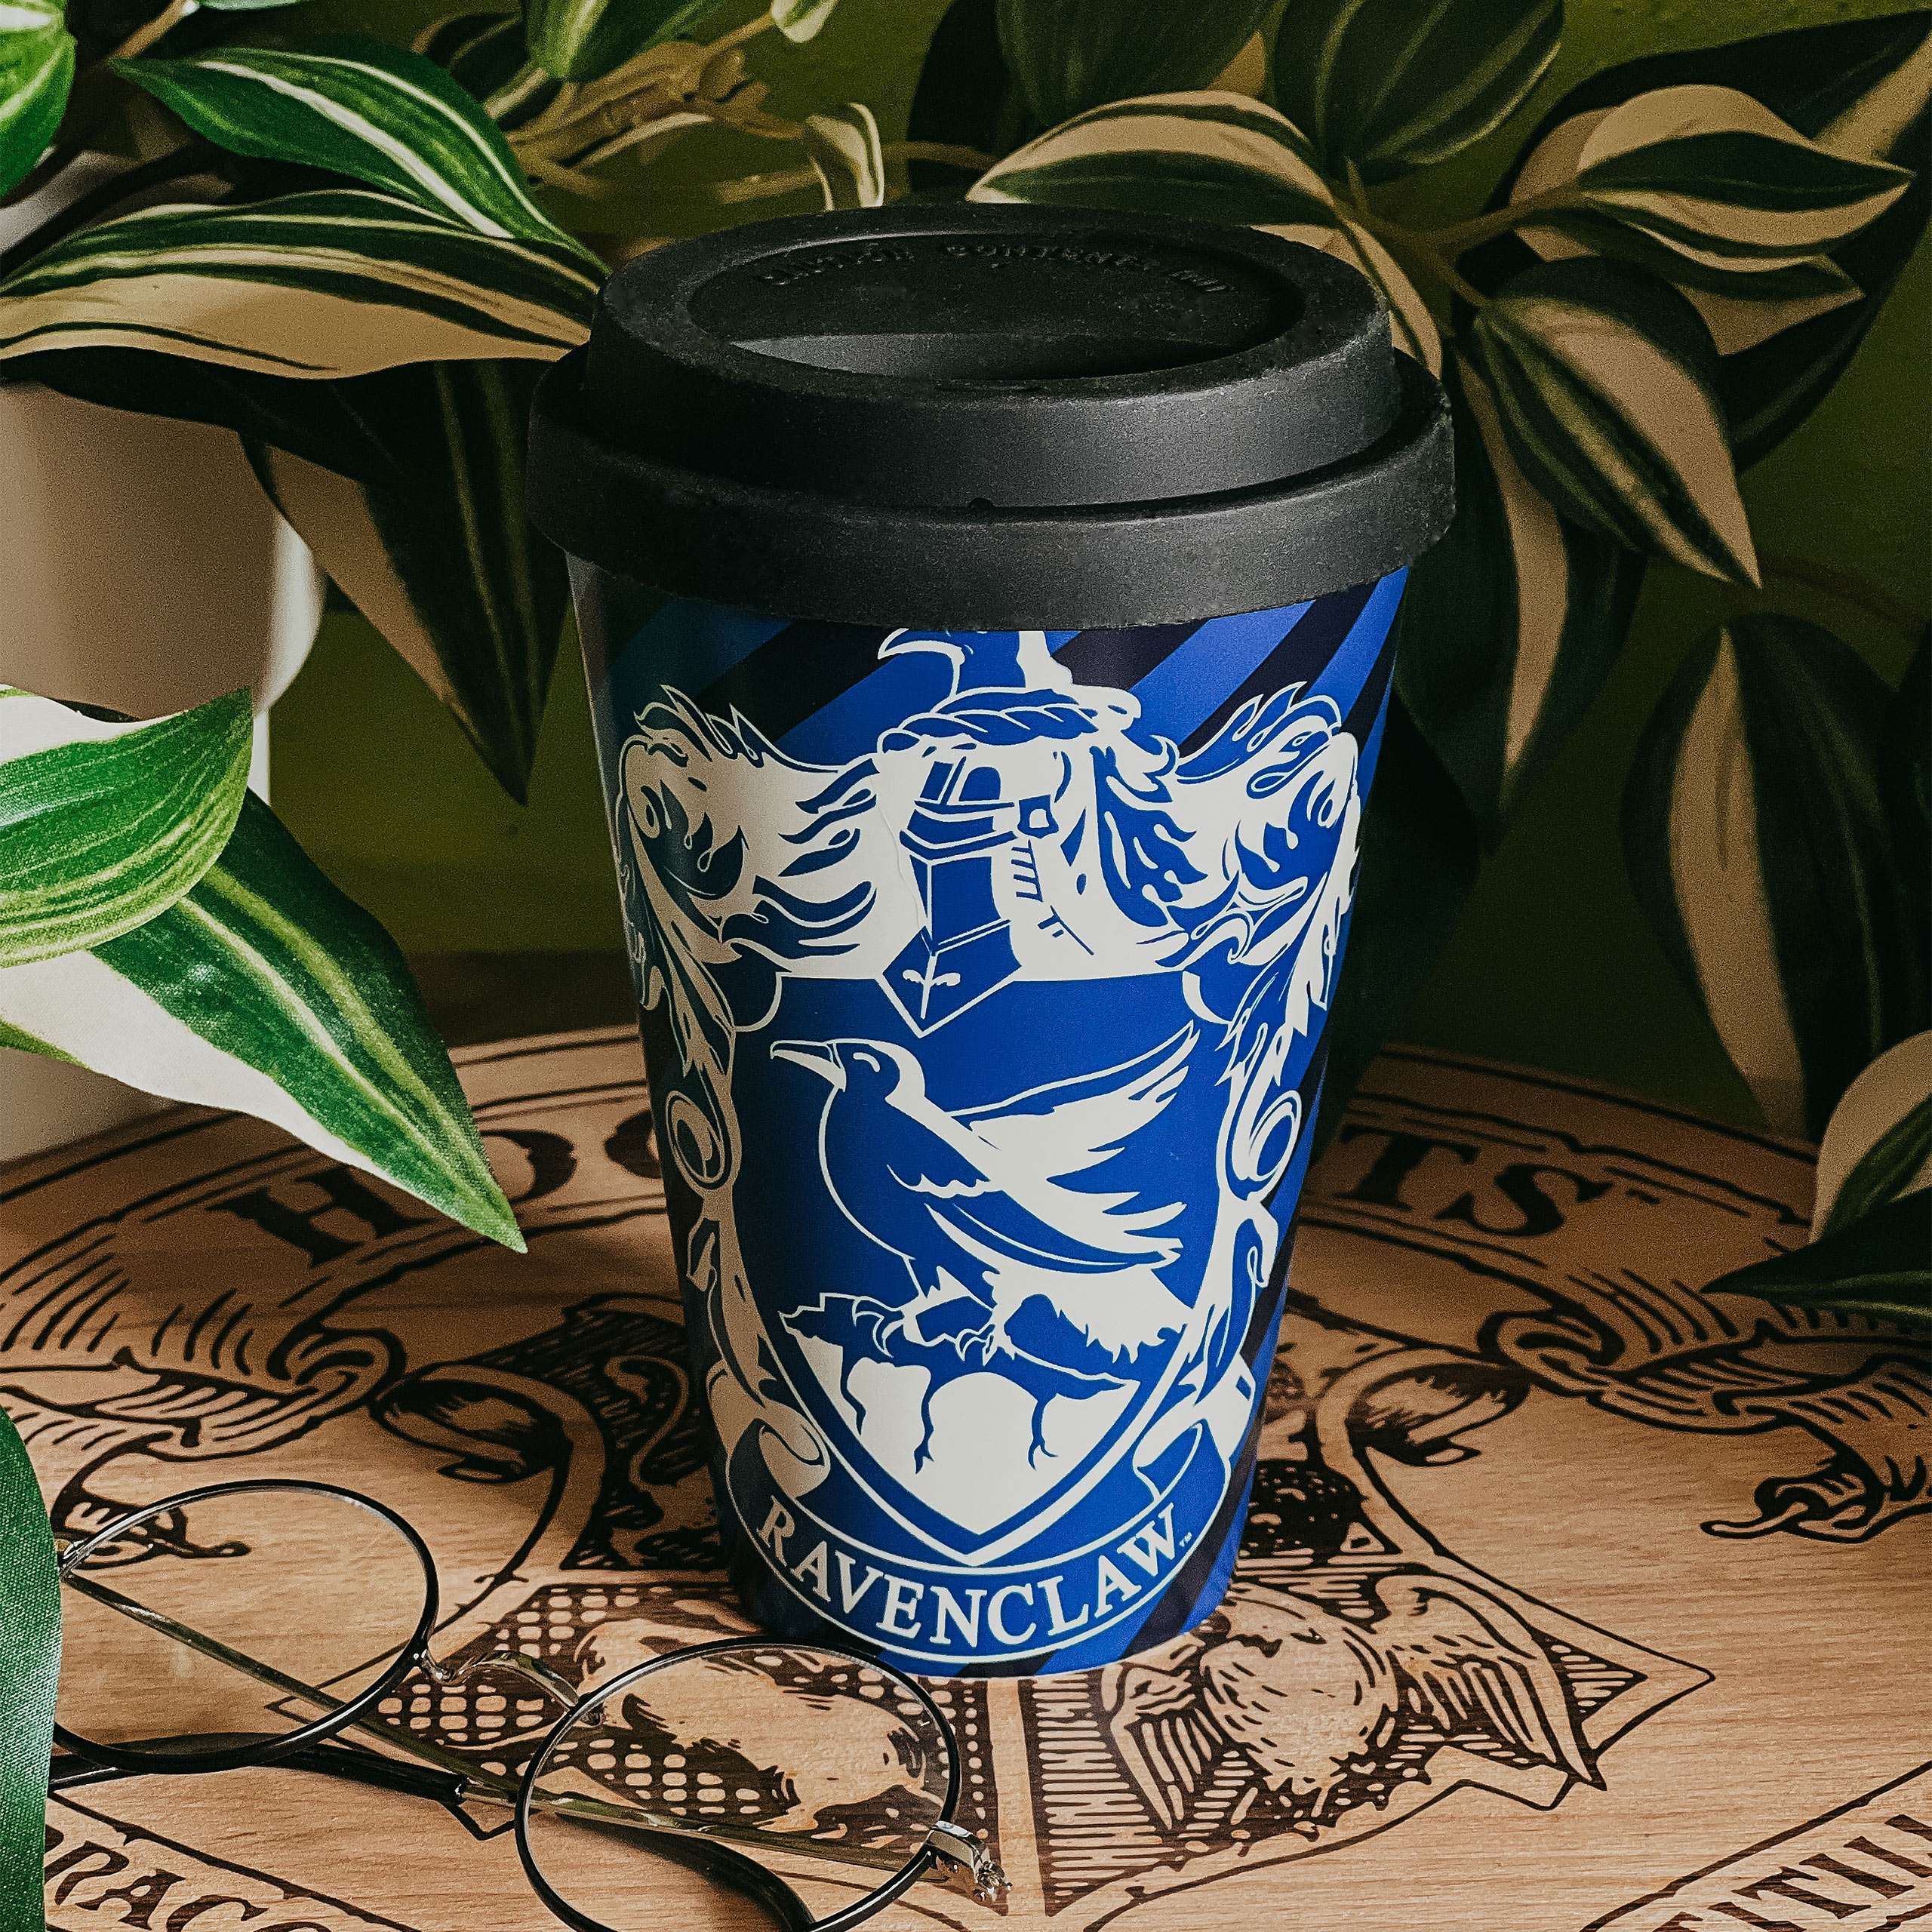 Harry Potter - Proud Ravenclaw To Go Cup